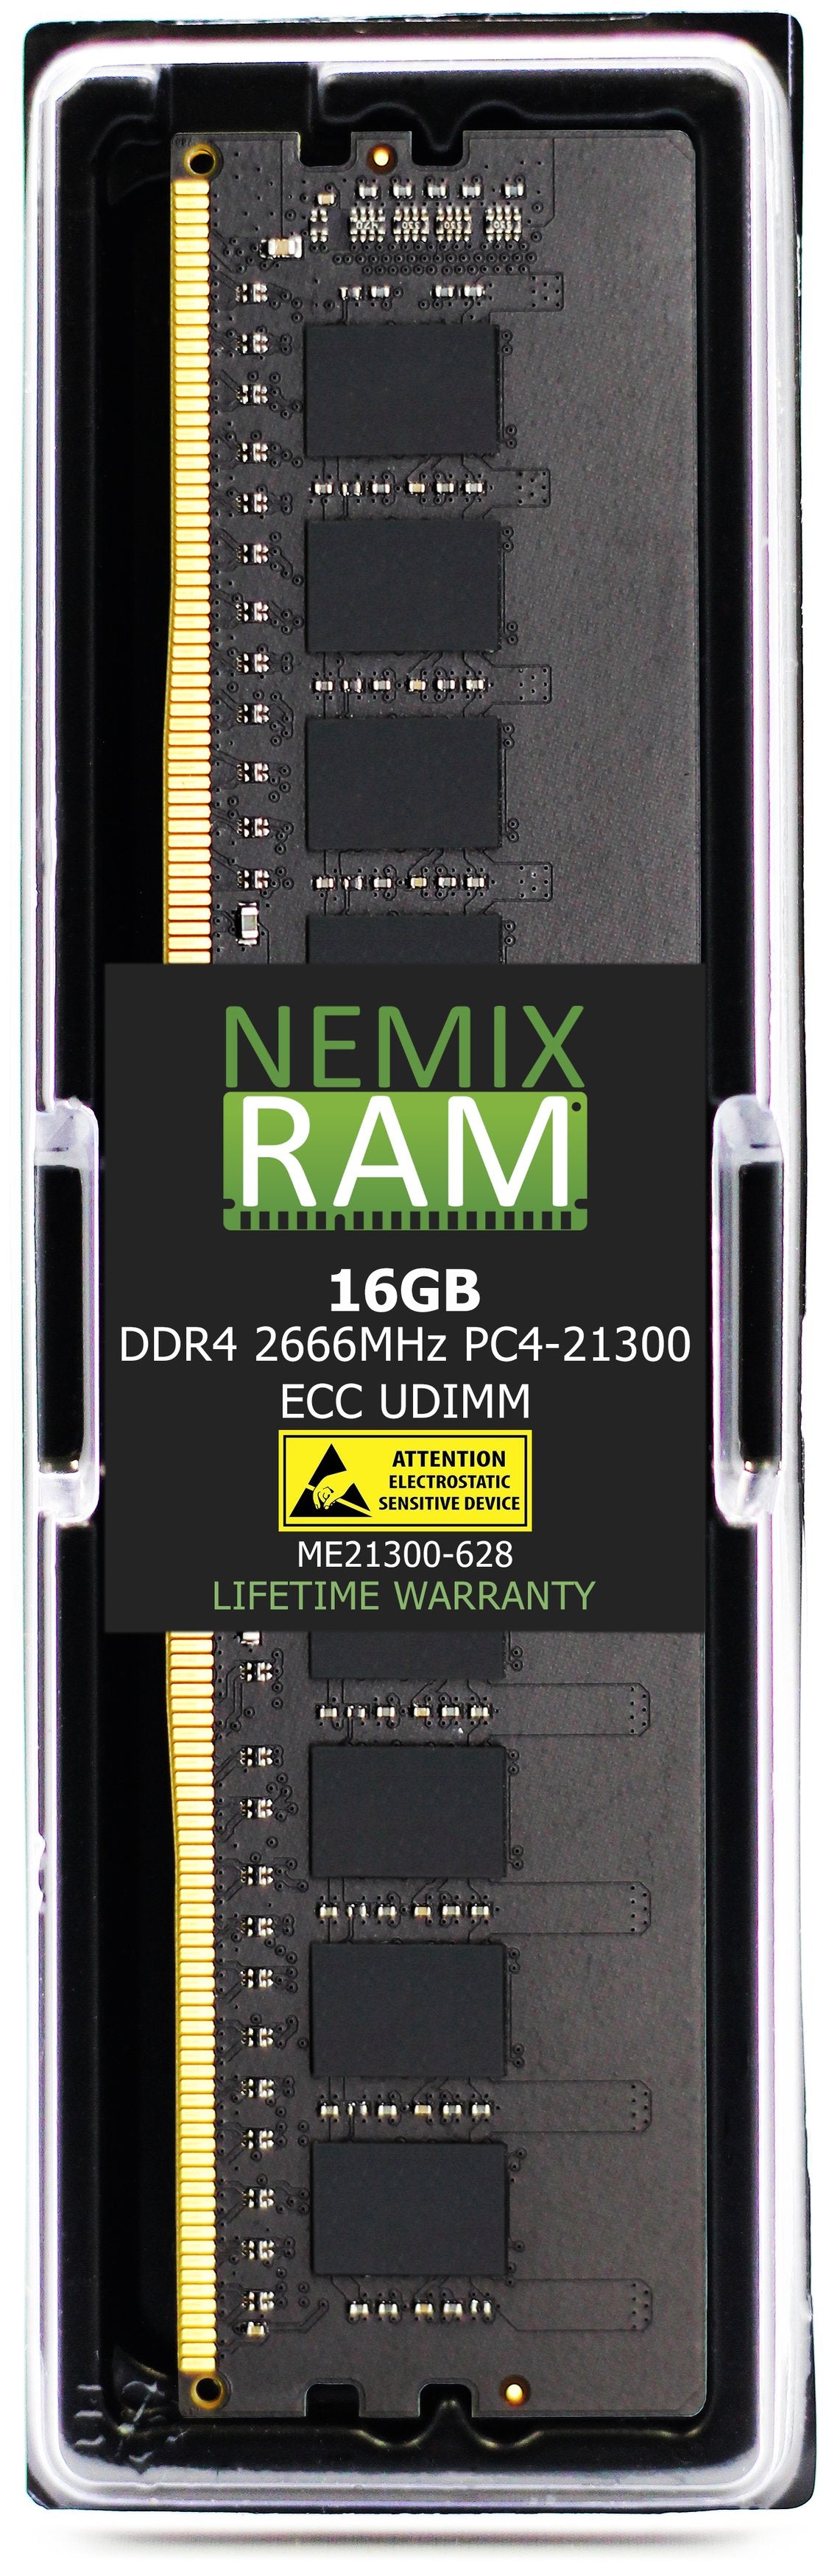 DDR4 2666MHZ PC4-21300 ECC UDIMM Compatible with Synology RackStation RS1619xs+